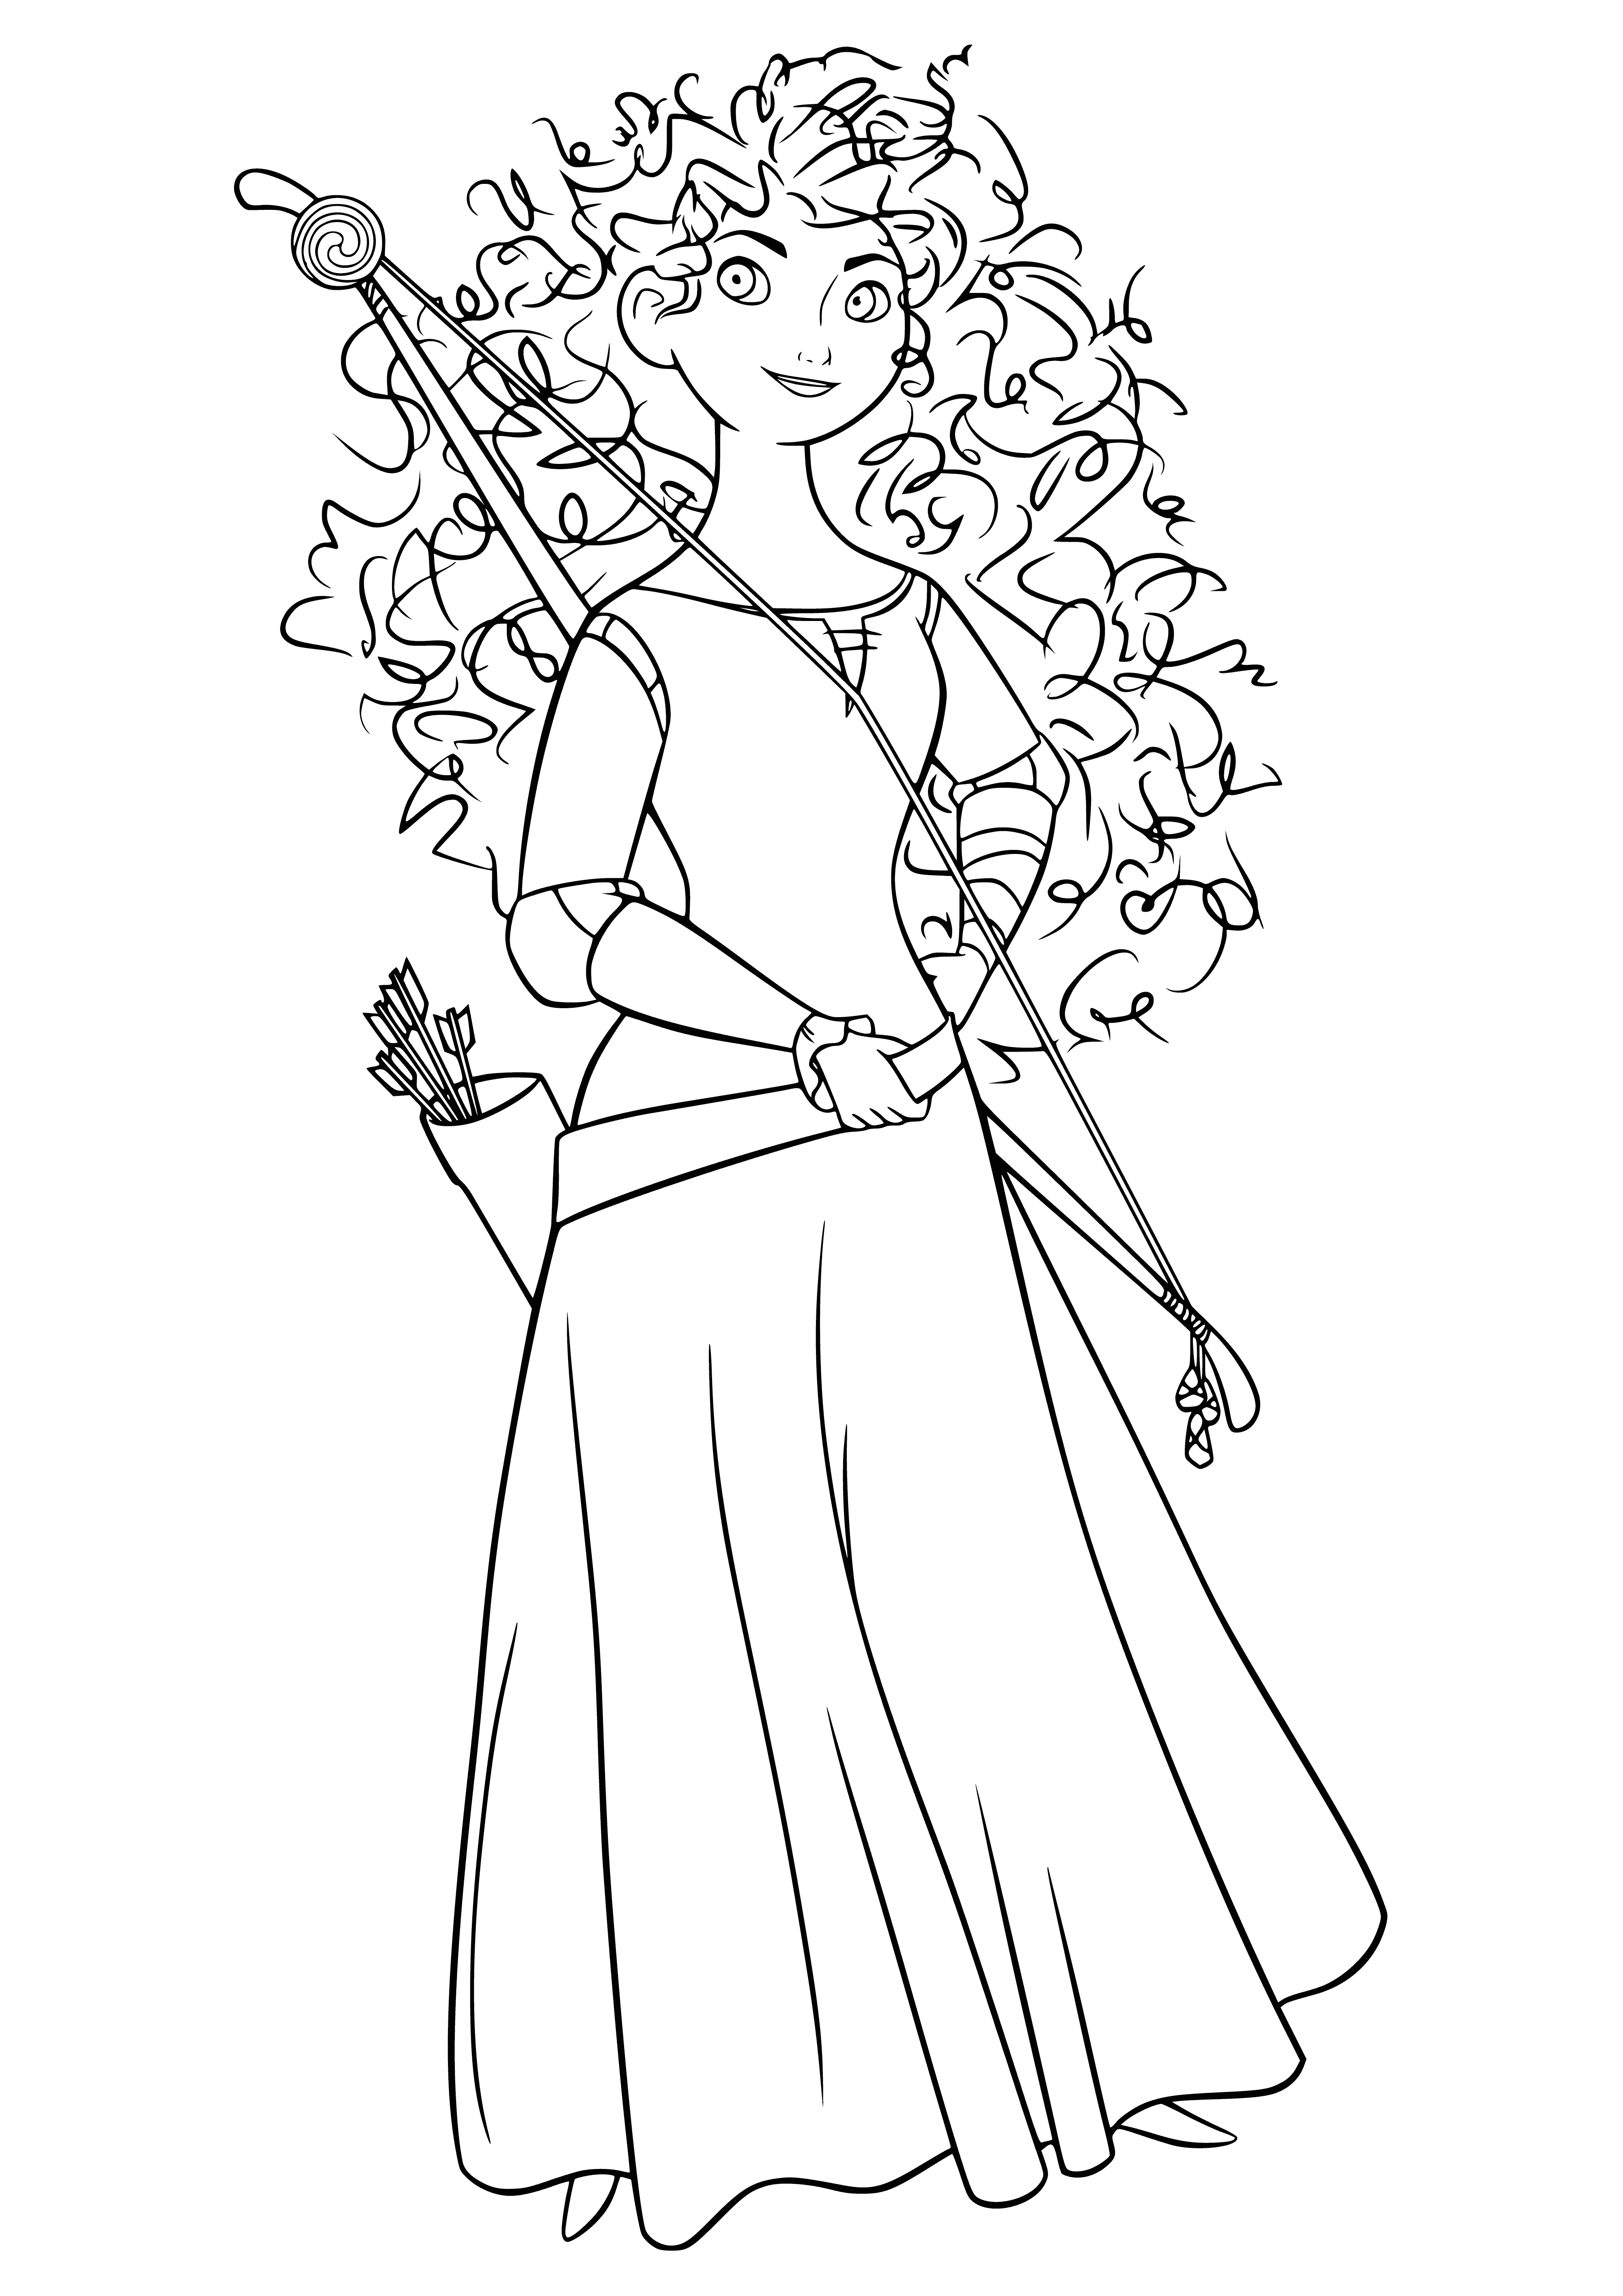 coloring page: Brave daughter of Scotland Merida dons green dress w/blue belt, bow & quiver of arrows, sword, ready to use her courage.